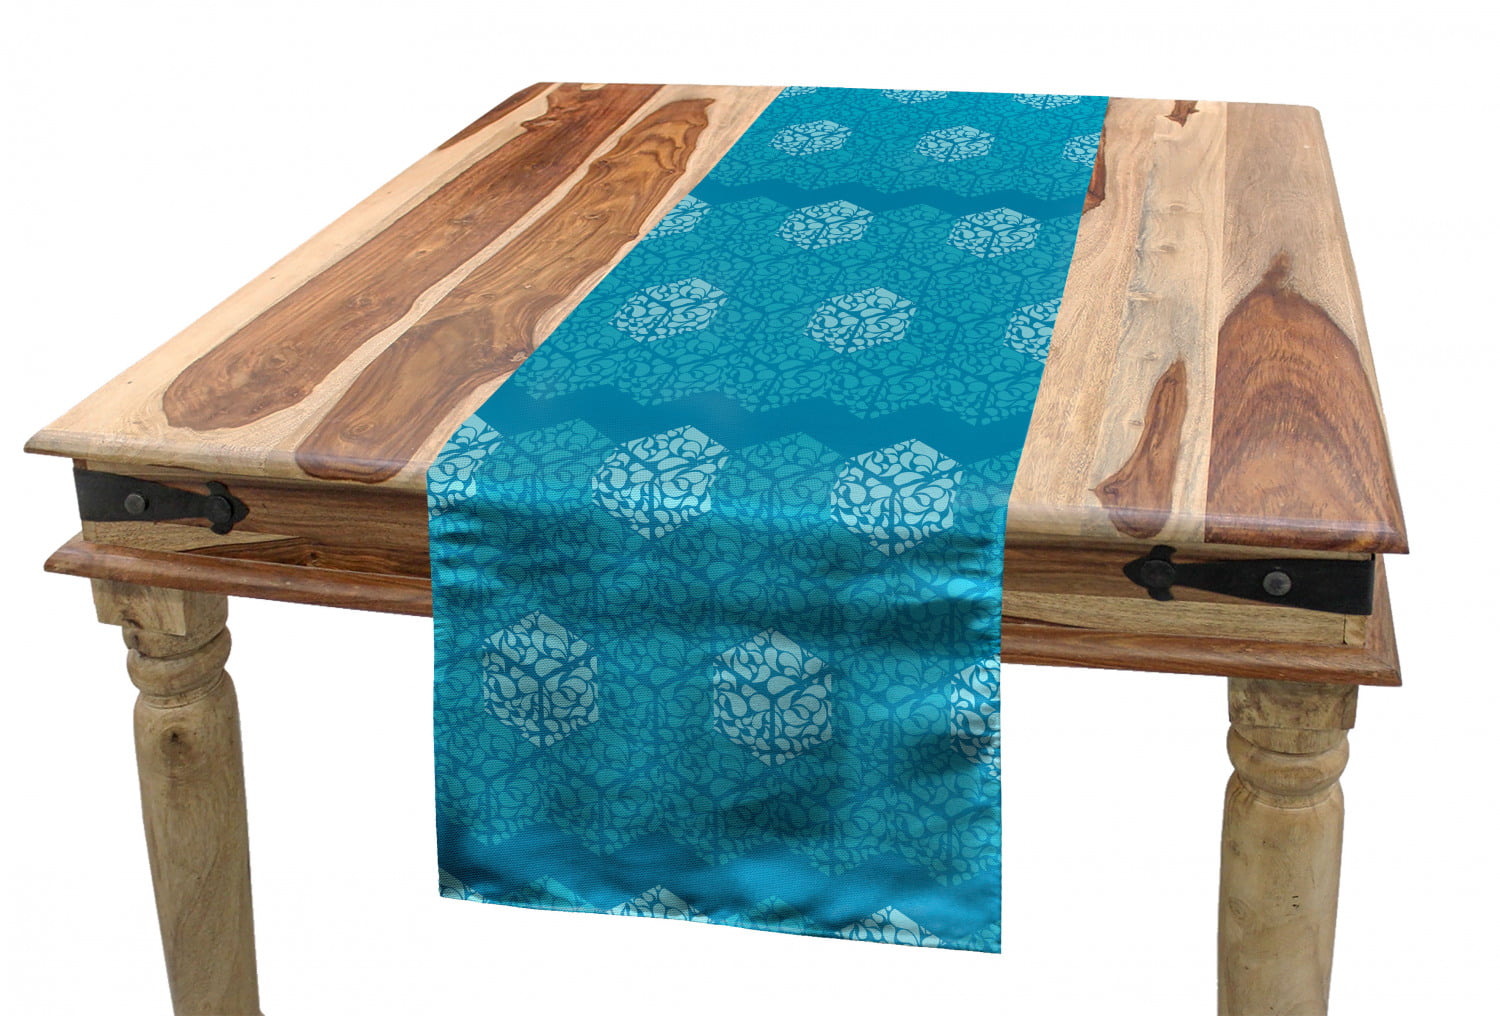 16 X 90 Ambesonne Art Nouveau Table Runner Teal and White Dining Room Kitchen Rectangular Runner Retro Style Abstract Pattern with Curves Simplistic Symmetic Tile Design